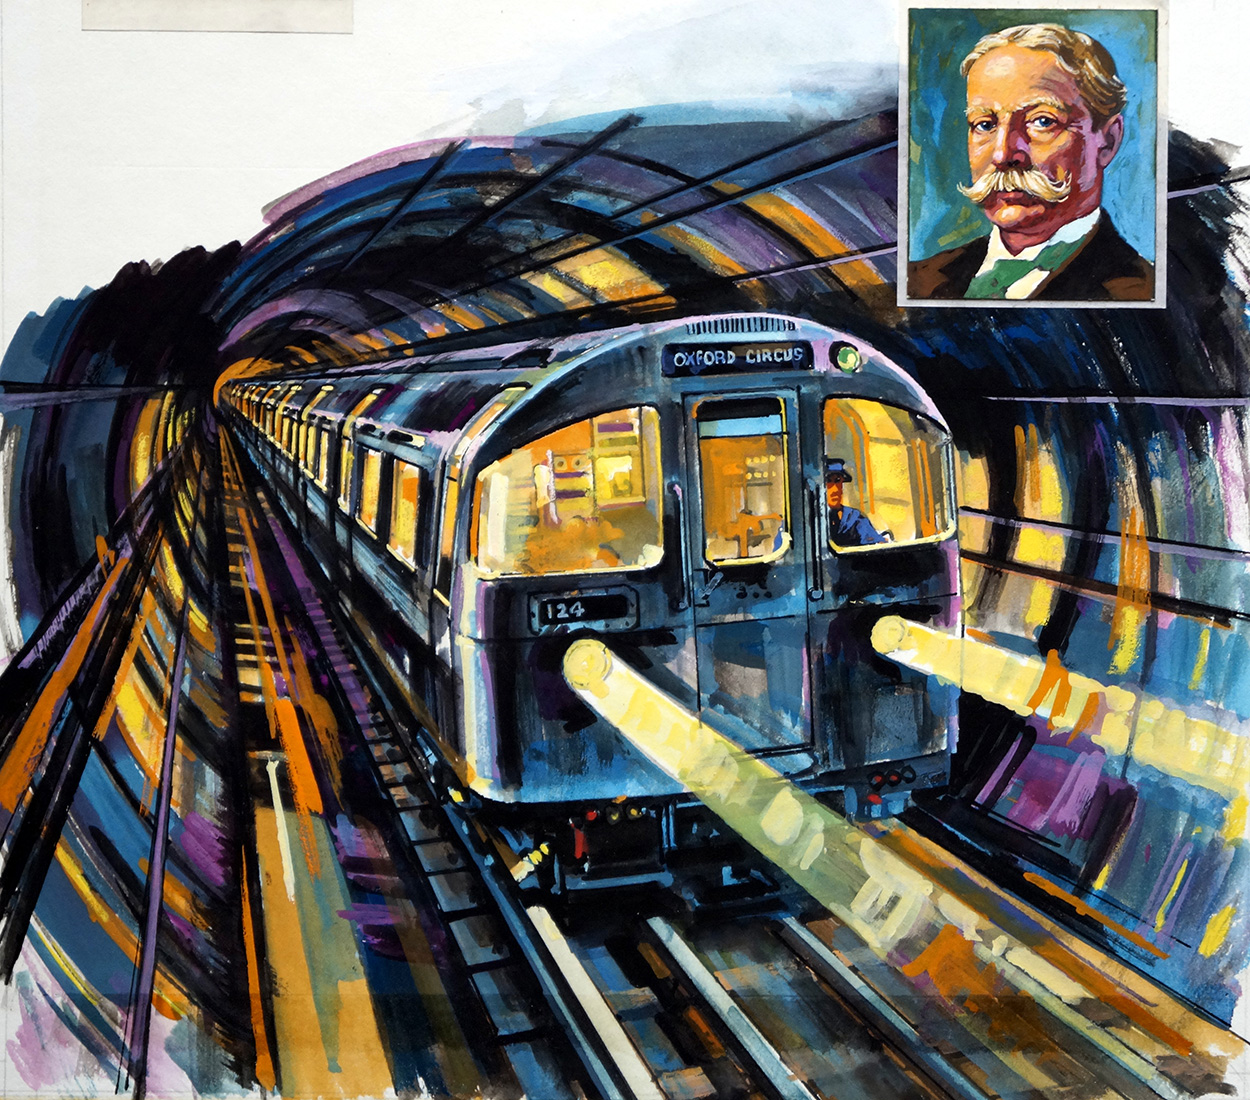 The Victoria Line - London Underground (Original) art by Harry Green at The Illustration Art Gallery